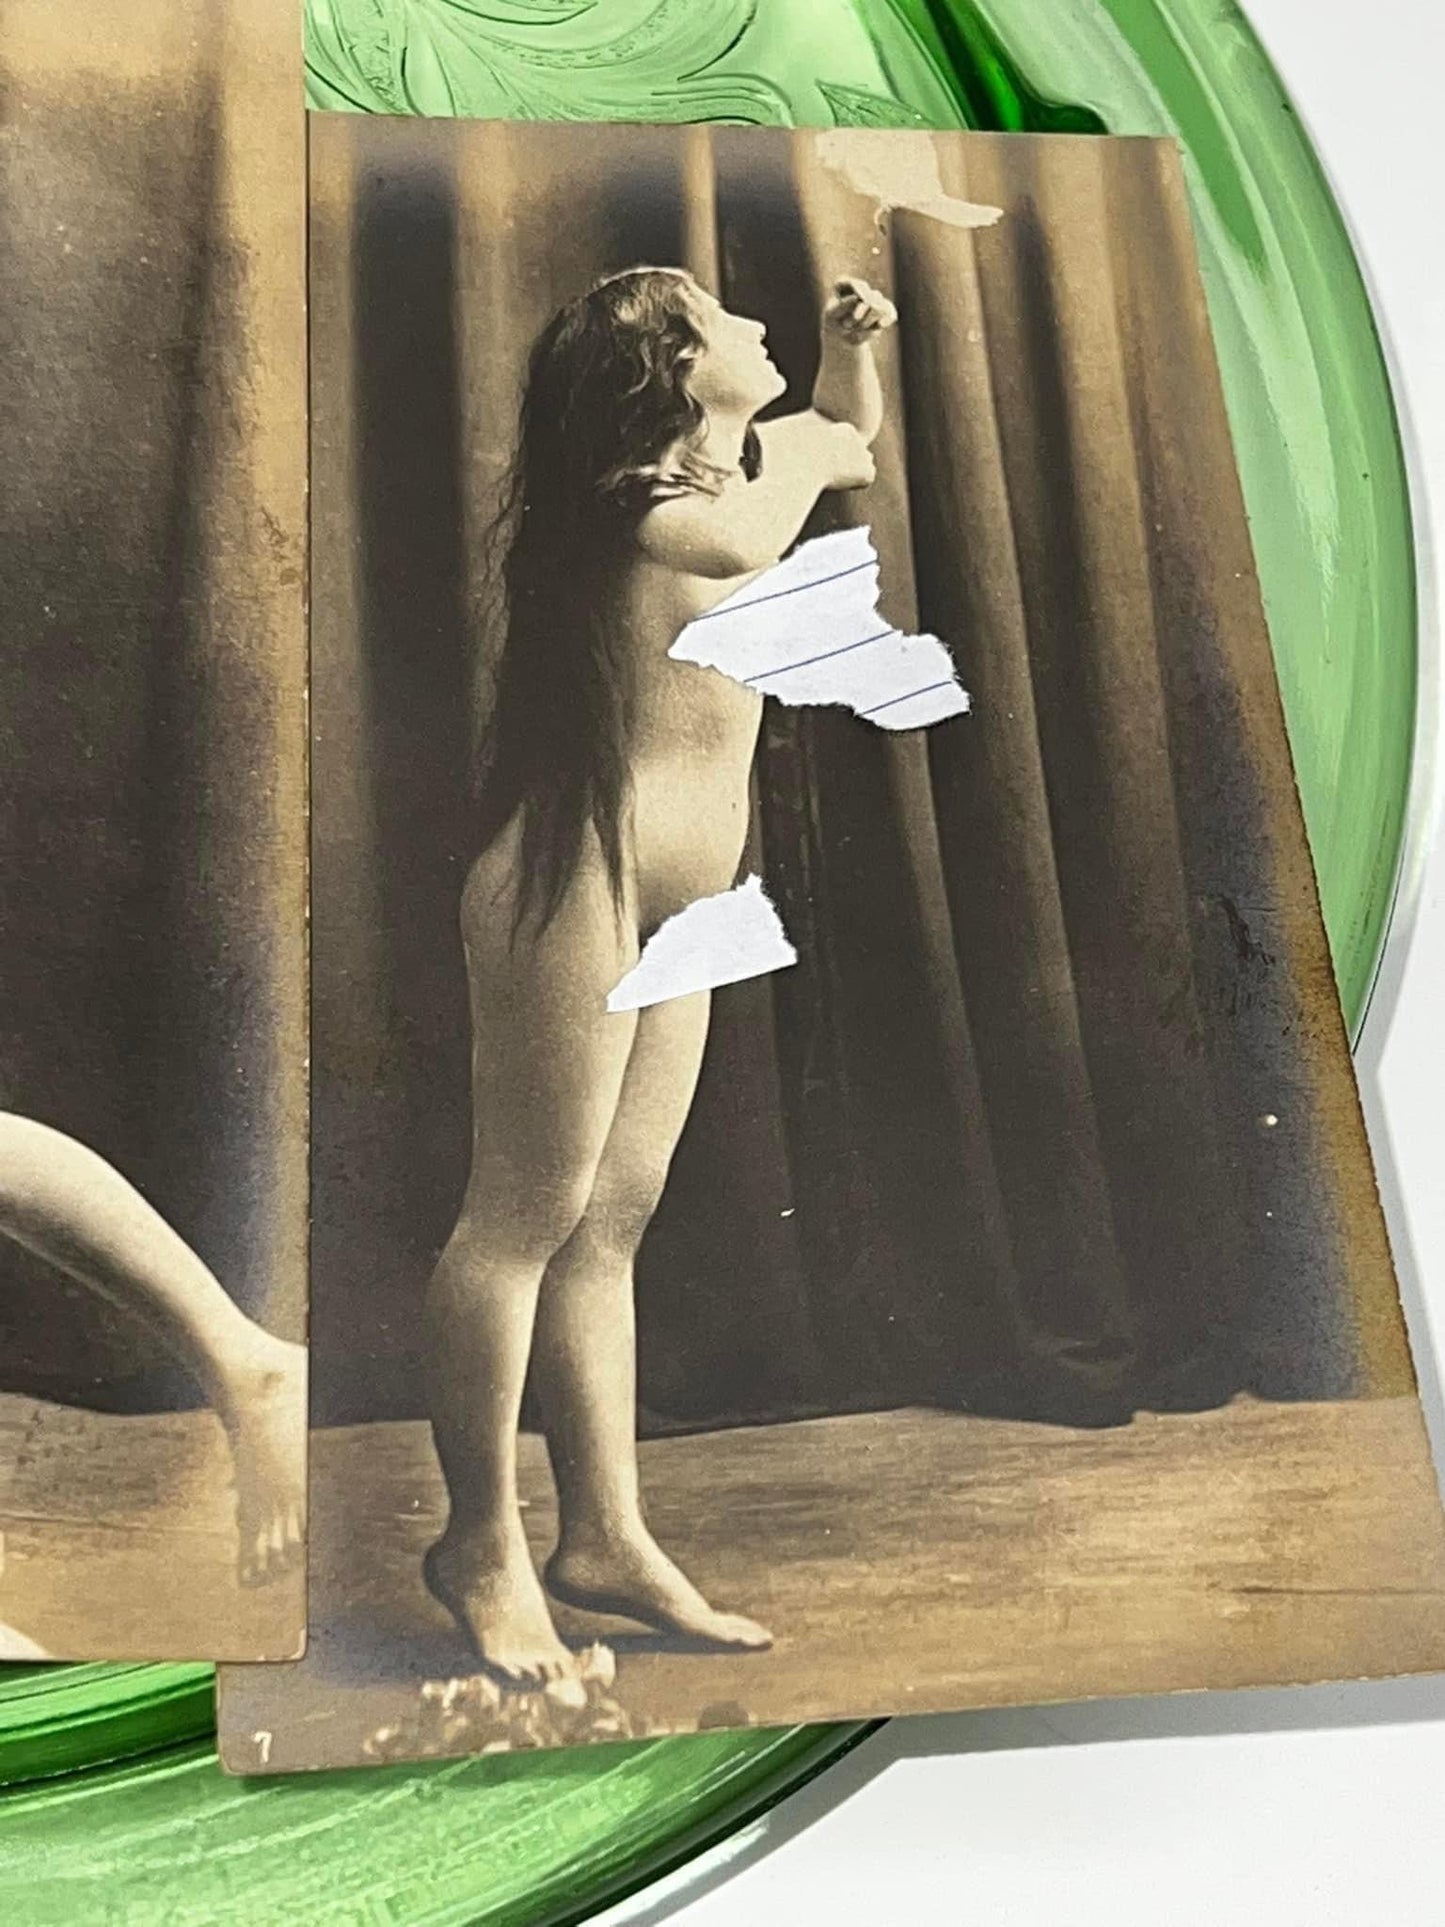 Antique photos 3 risqué nude rppc photos Beautiful young woman 3 different poses 1900s pinup vintage photography